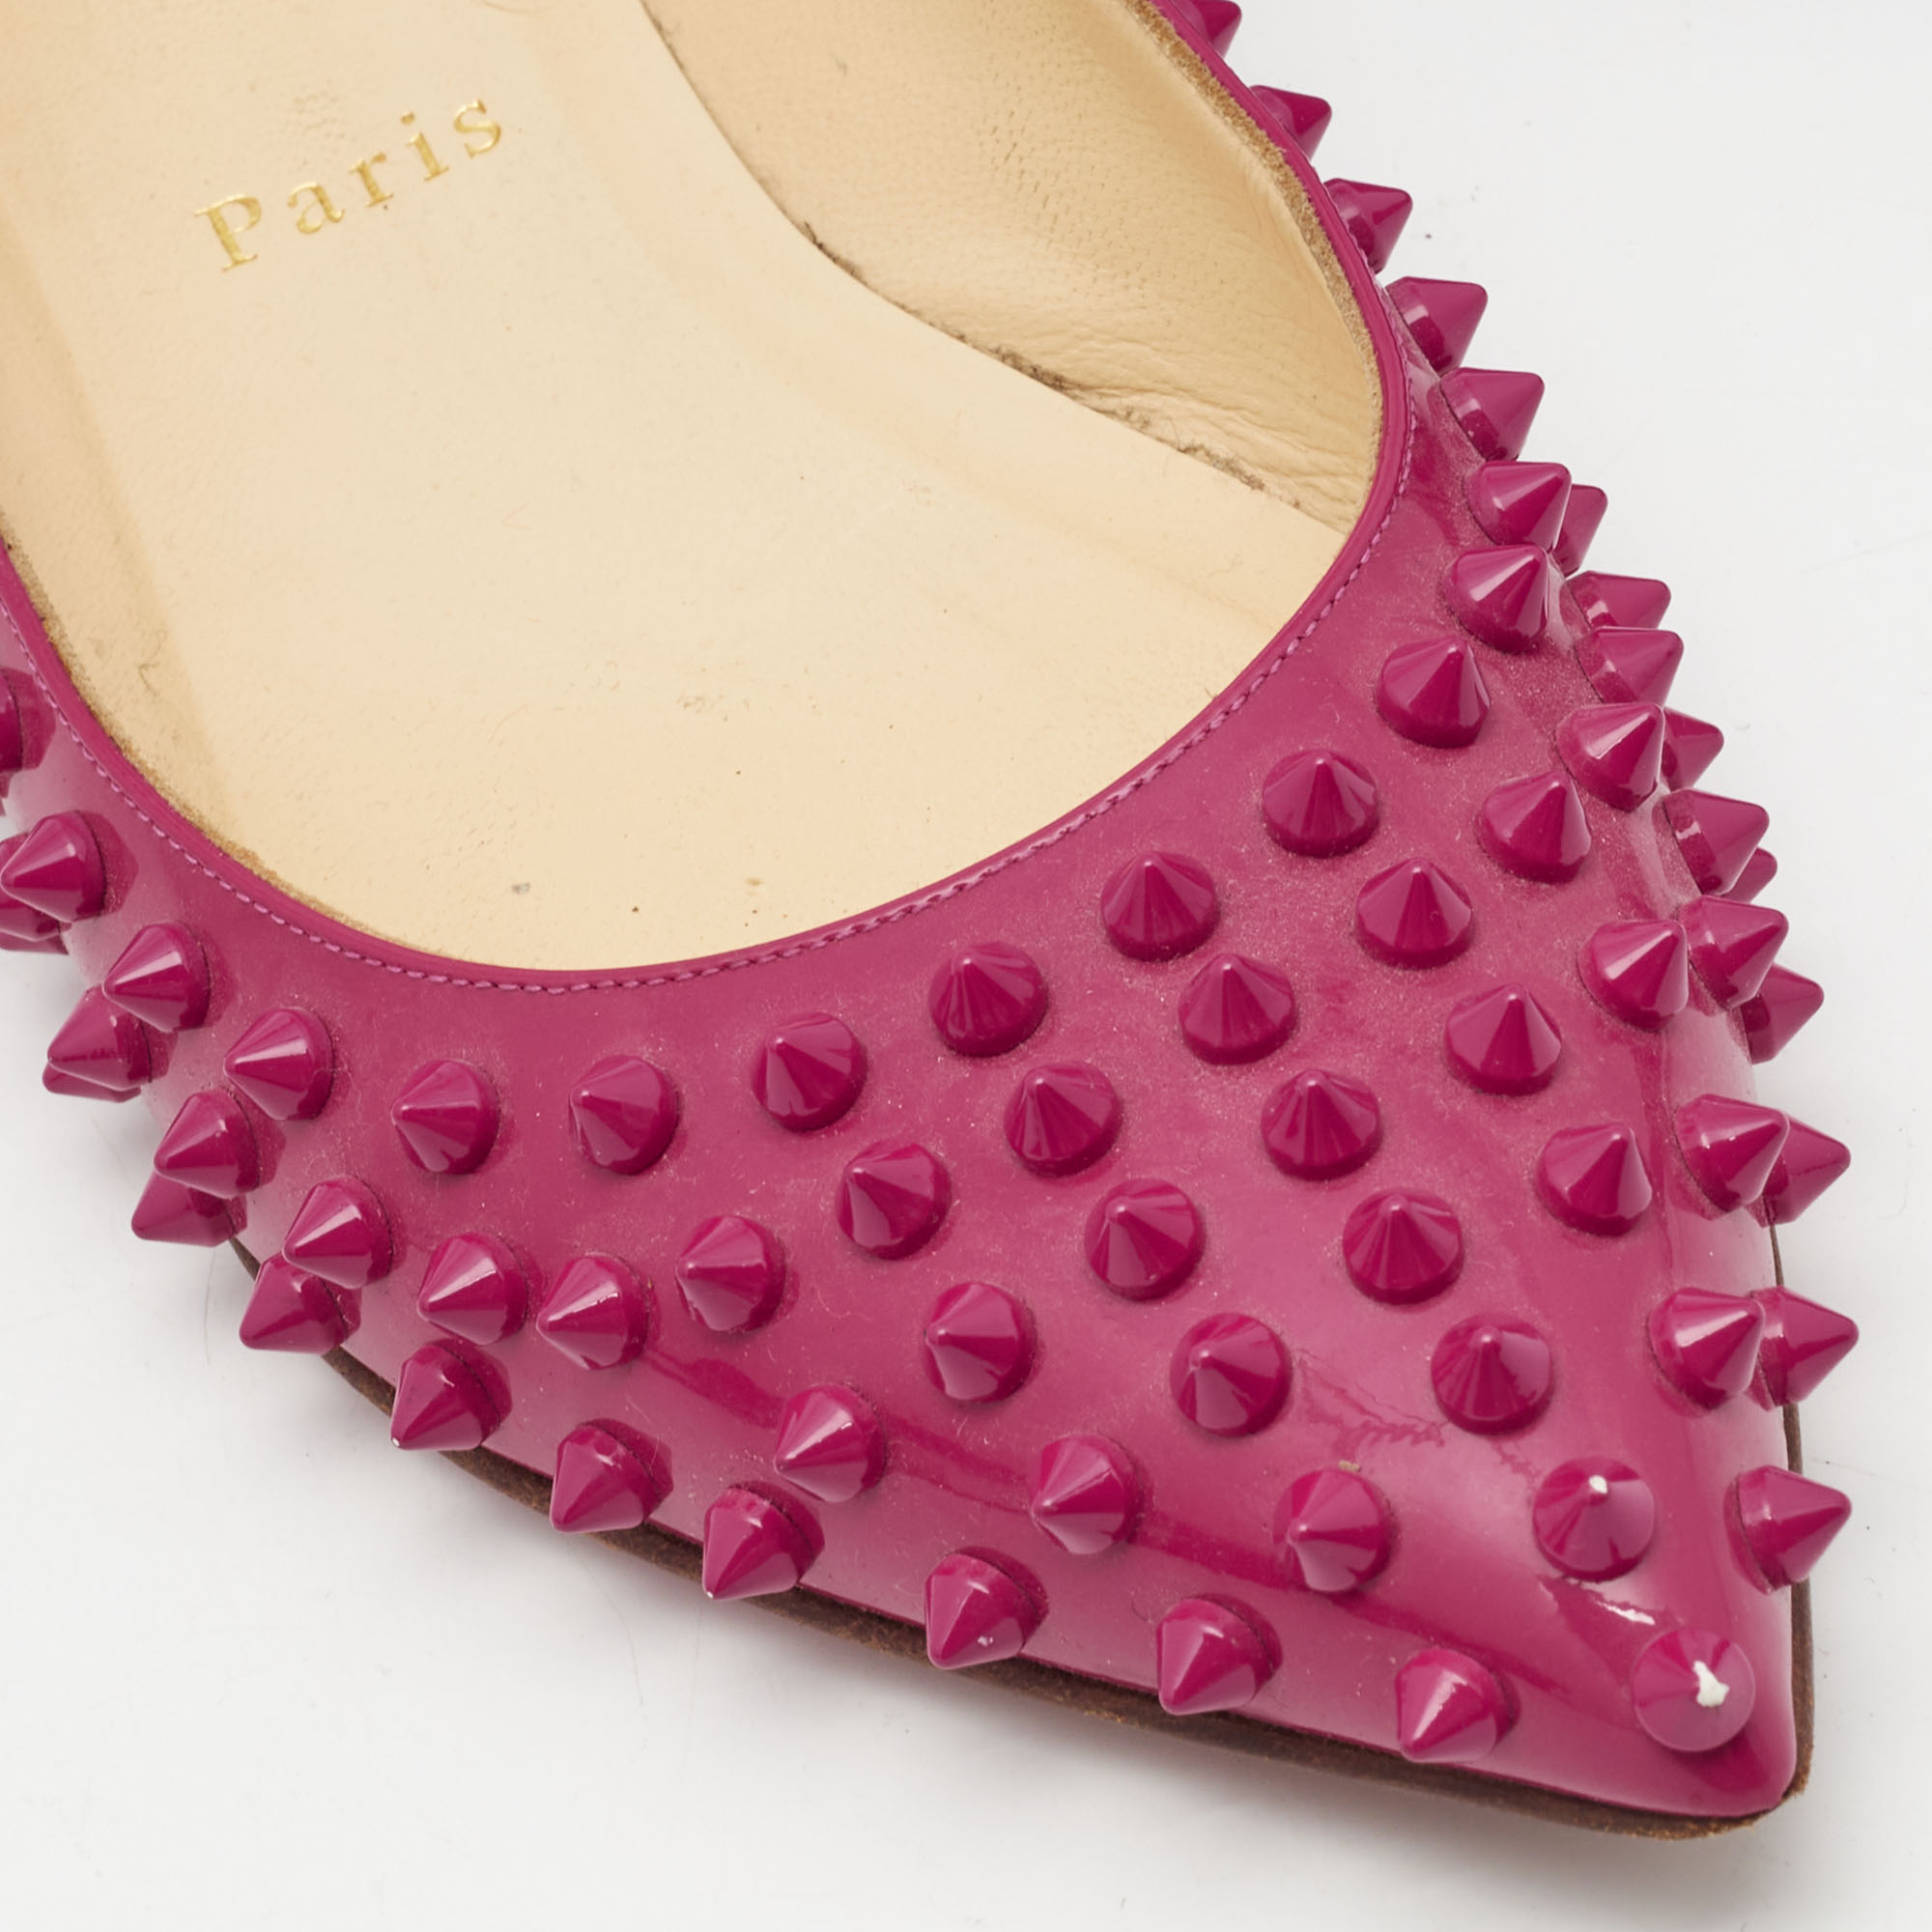 Christian Louboutin Pink Patent Leather Pigalle Spikes Ballet Flats Size 39